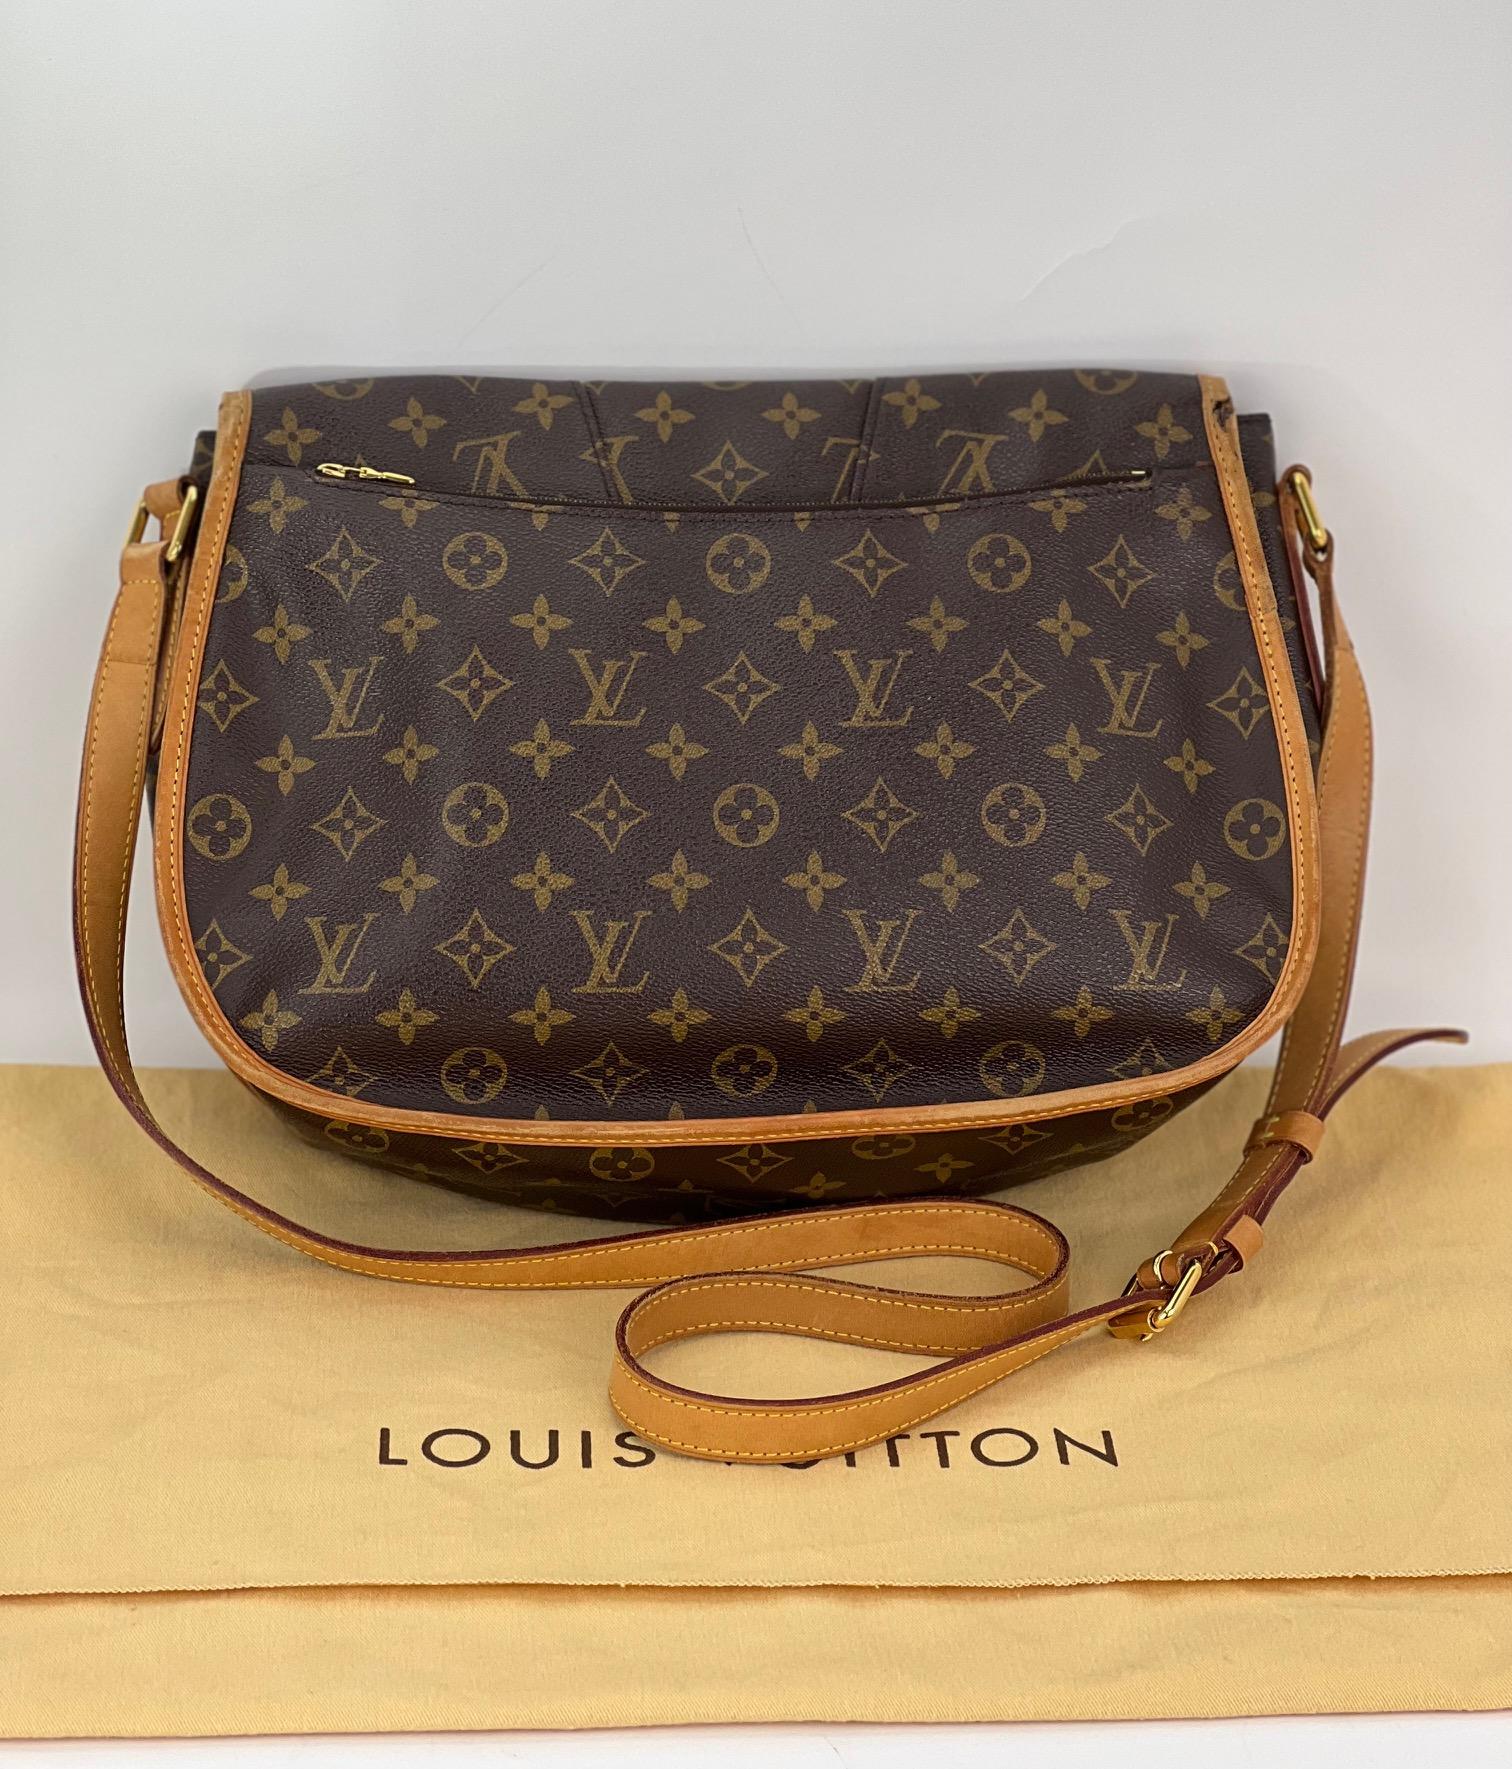 Pre-Owned 100% Authentic
Louis Vuitton Menilmontant MM Monogram
Messenger Bag
RATING: B C   good, shows some
signs of wear
STRAP: adjustable leather, has some light
marks and stains, red piping on side has some wear
DROP: 19'' to 22.5''
PIPING:  has